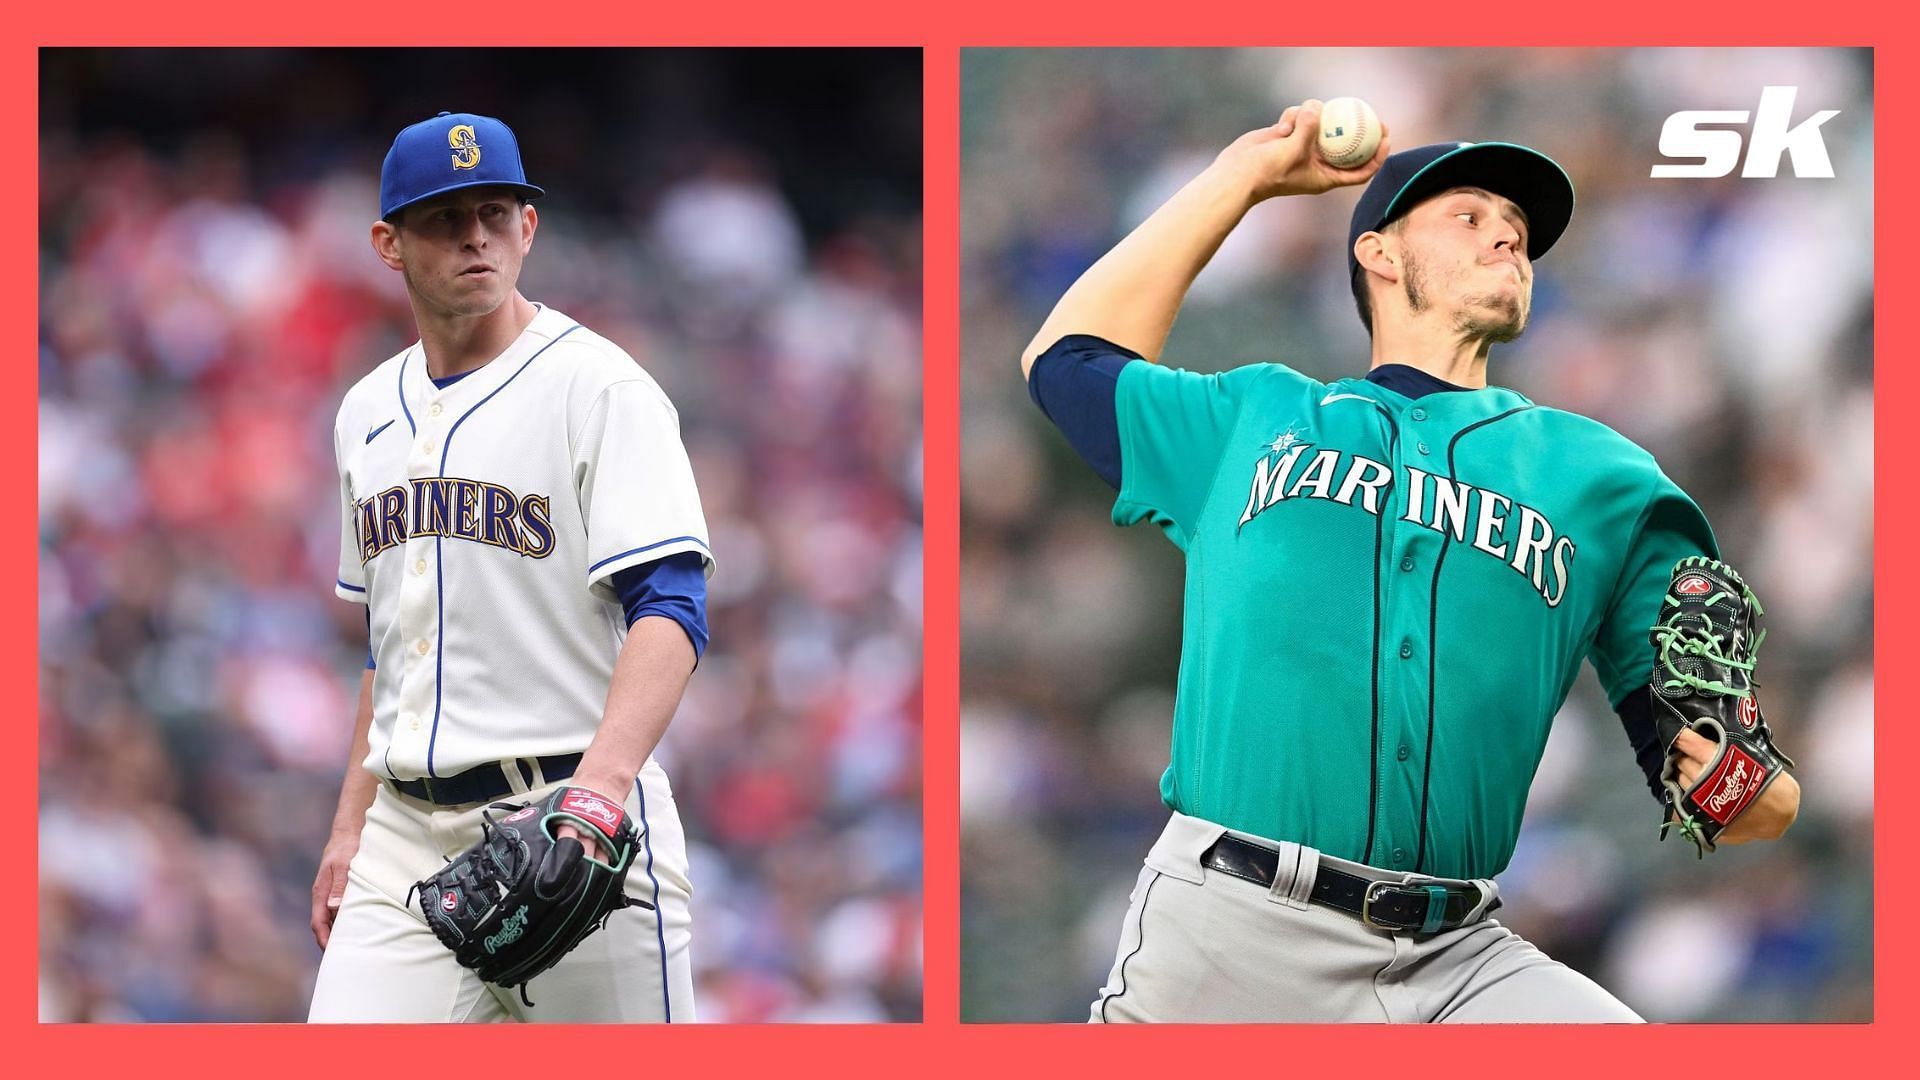 Keeping Chris Flexen on the roster pays off for Mariners